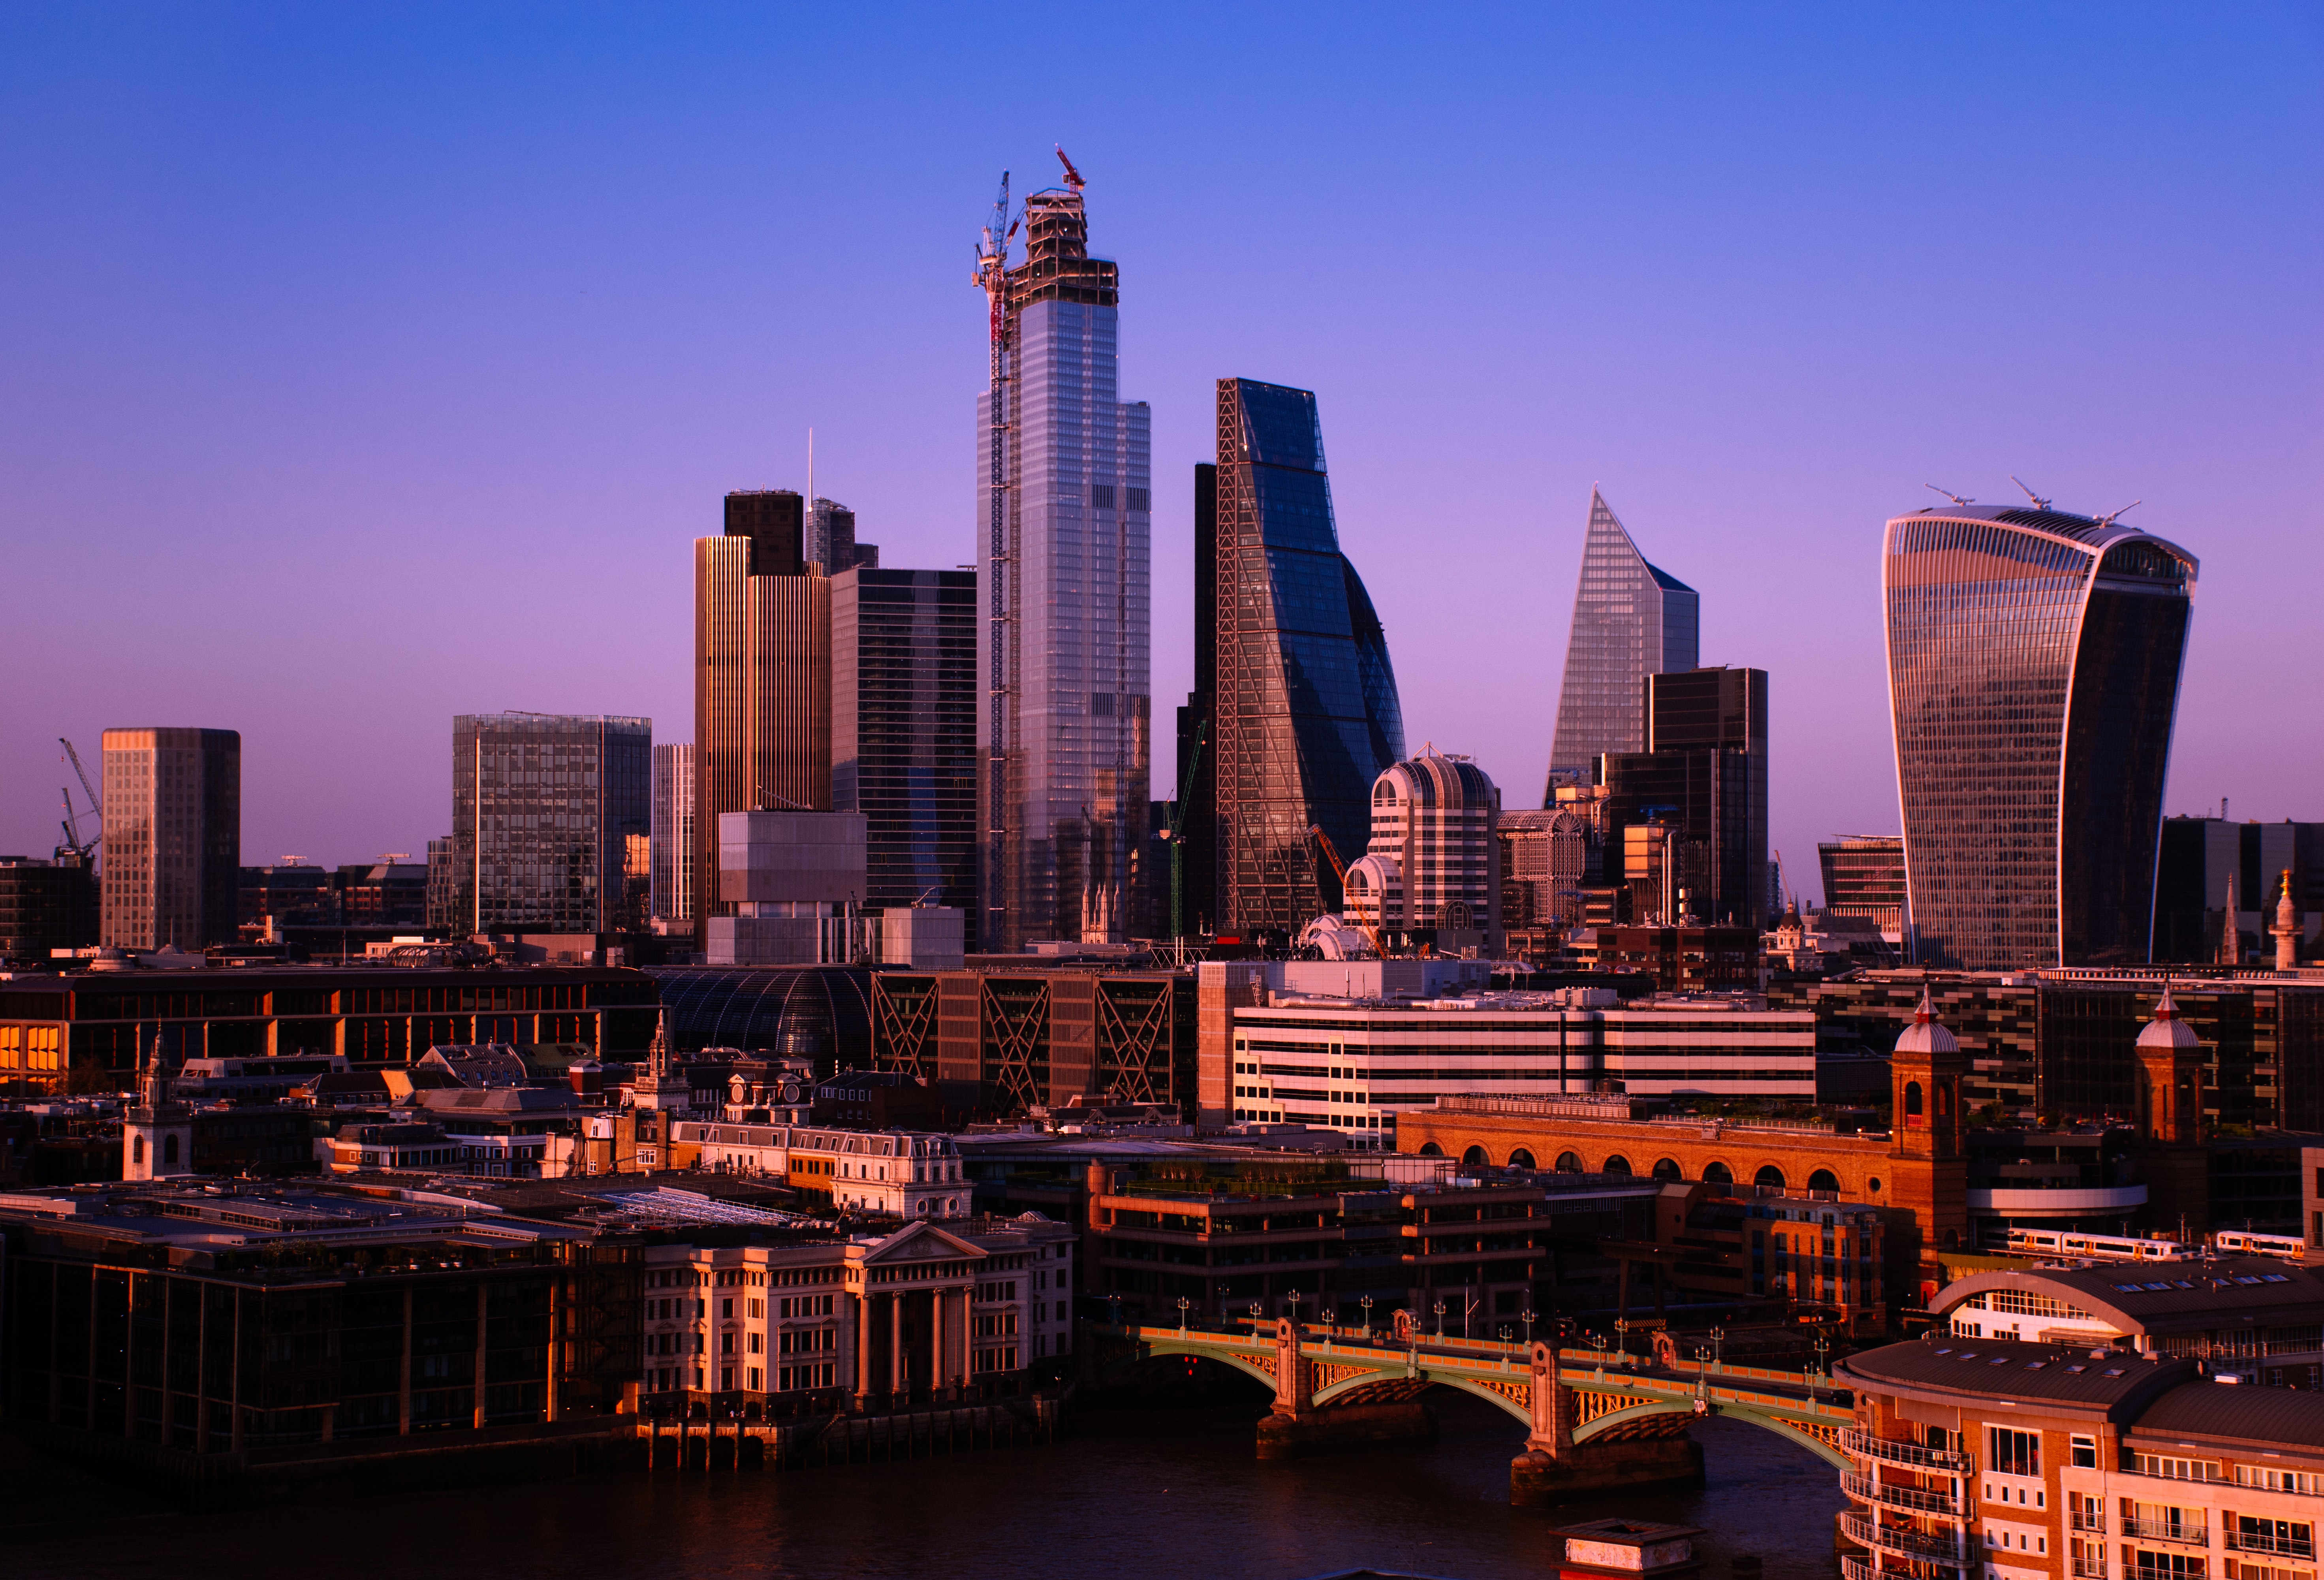 london, cities, architecture, city, building, tower, modern, england Full HD